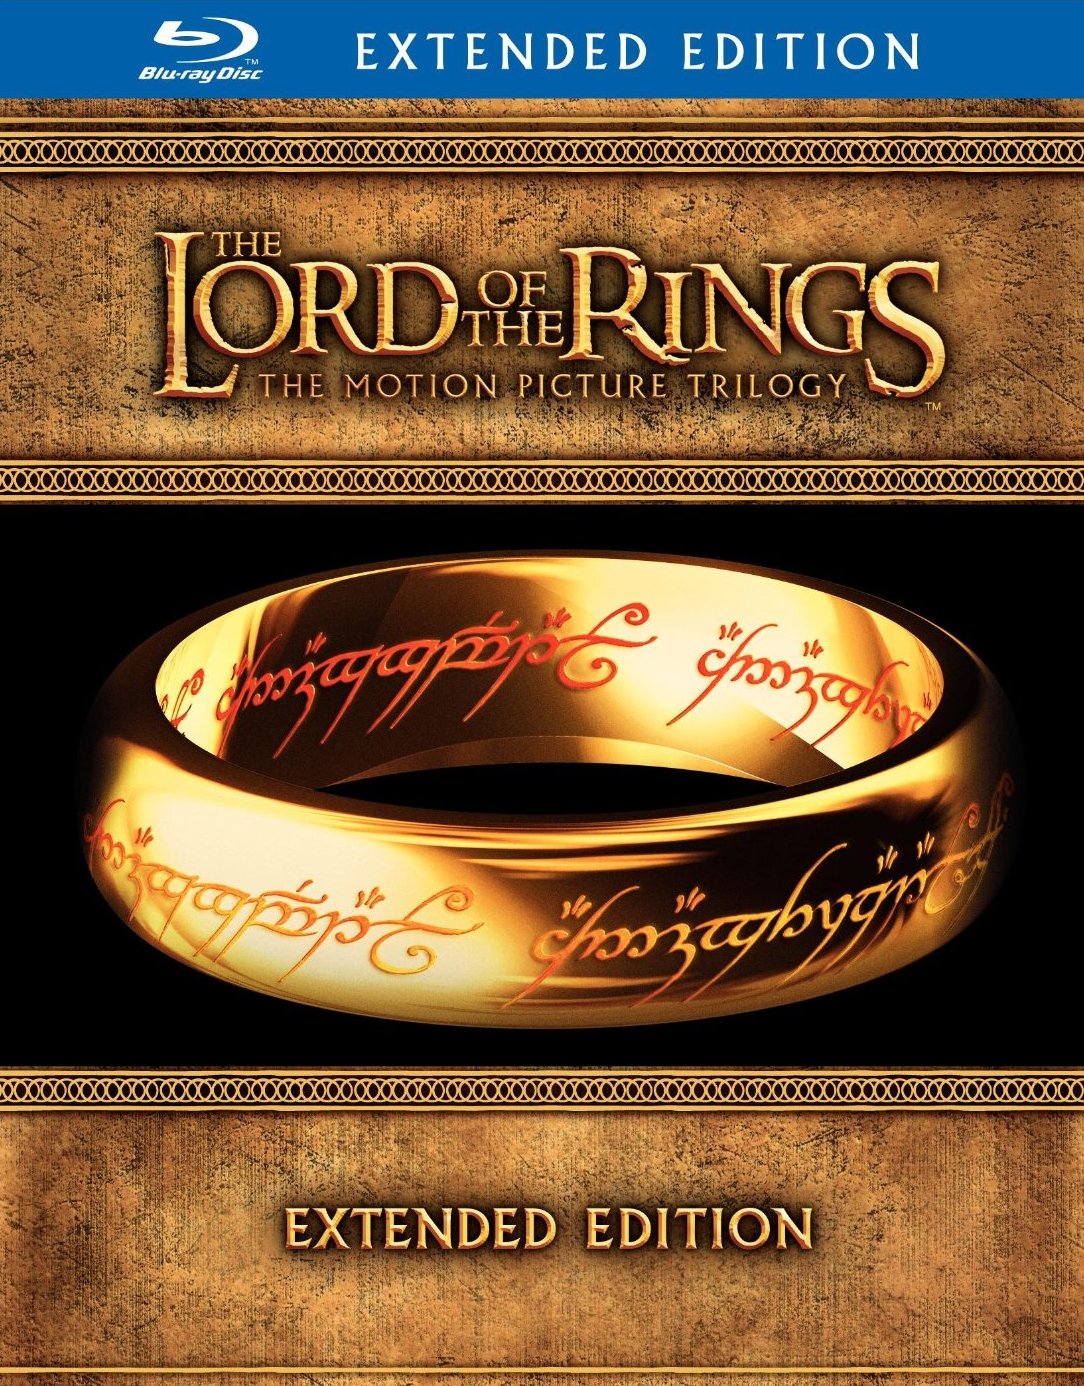 The Lord of the Rings: The Return of the King YIFY subtitles